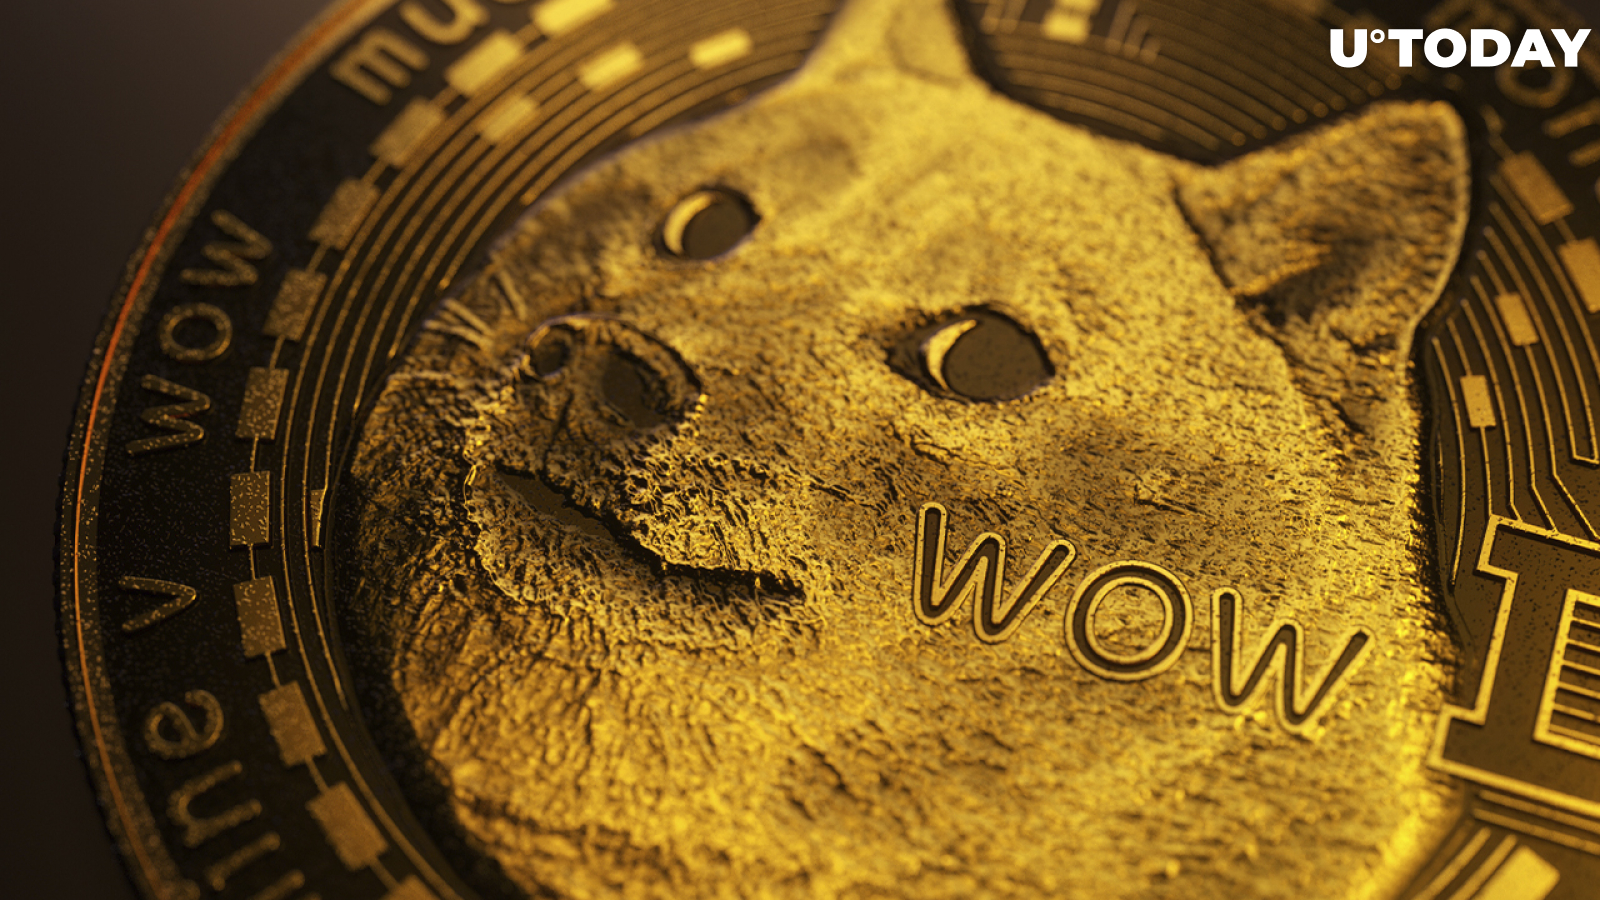 Dogecoin Co-Founder Says DOGE Needs to Market Itself as "Digital Currency"